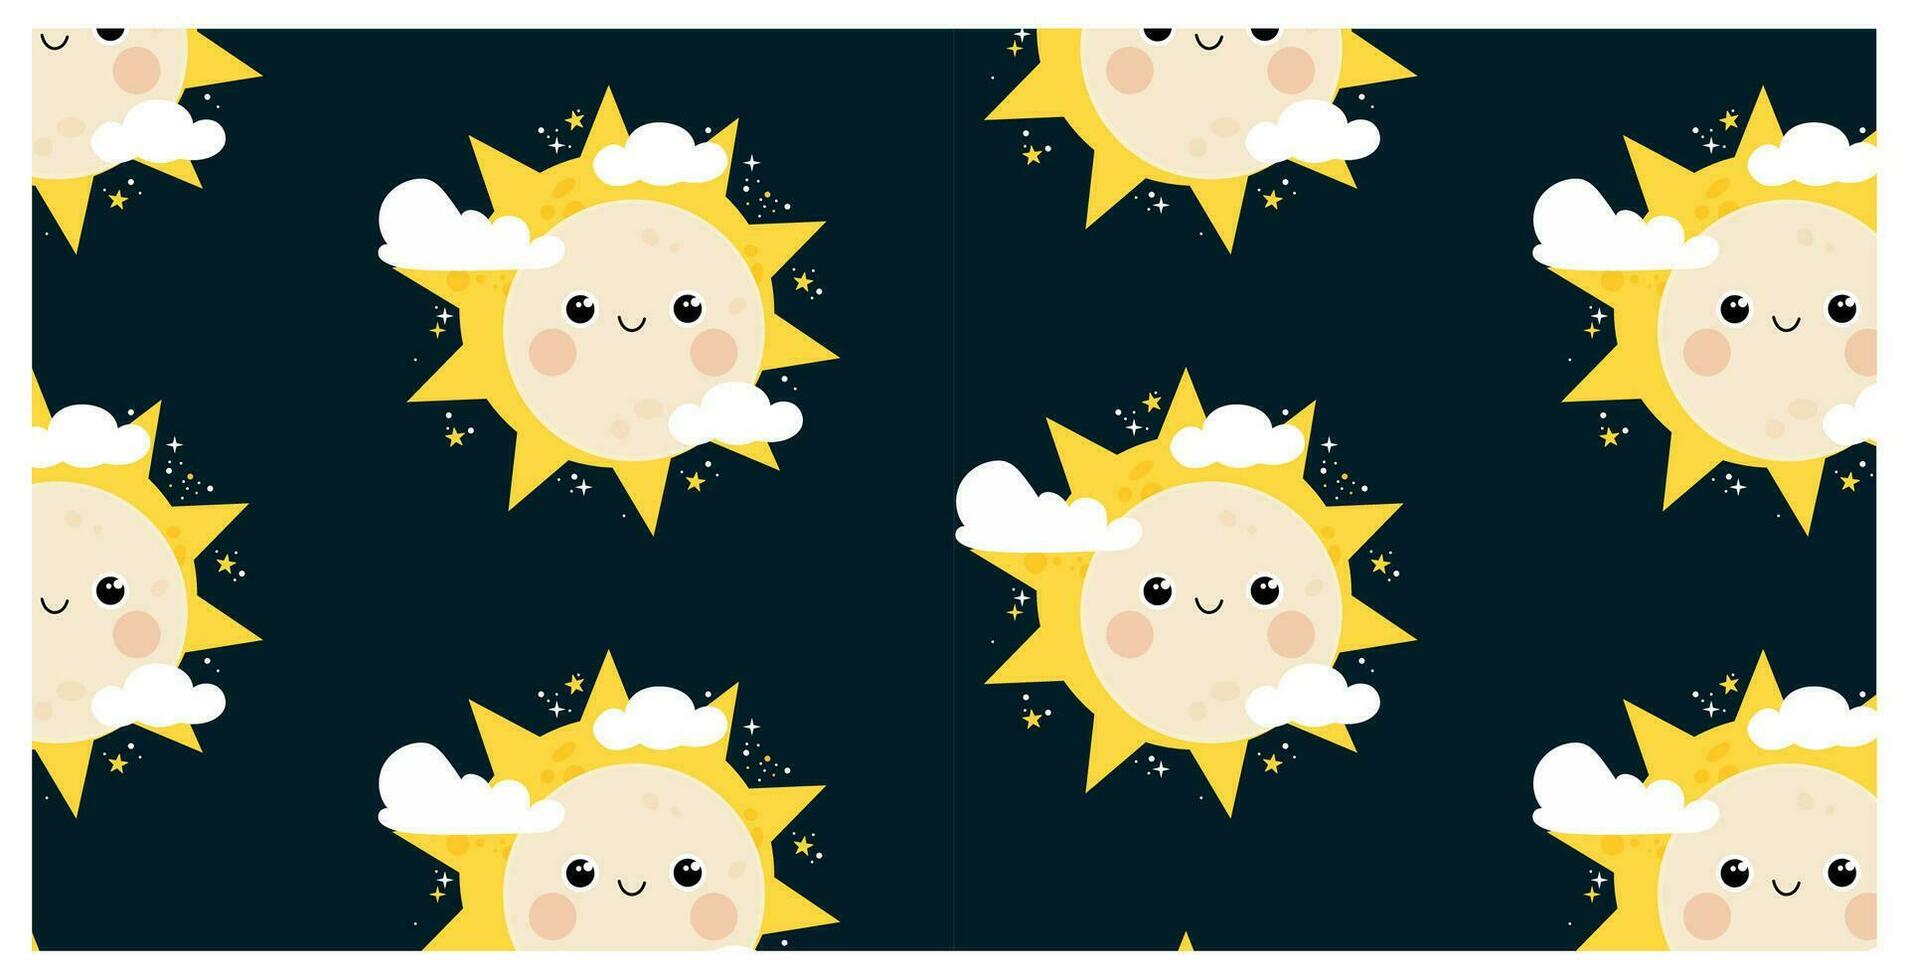 Hand drawn pattern design with cute smiling moon and sun. Seamless vector solar eclipse concept on dark background.